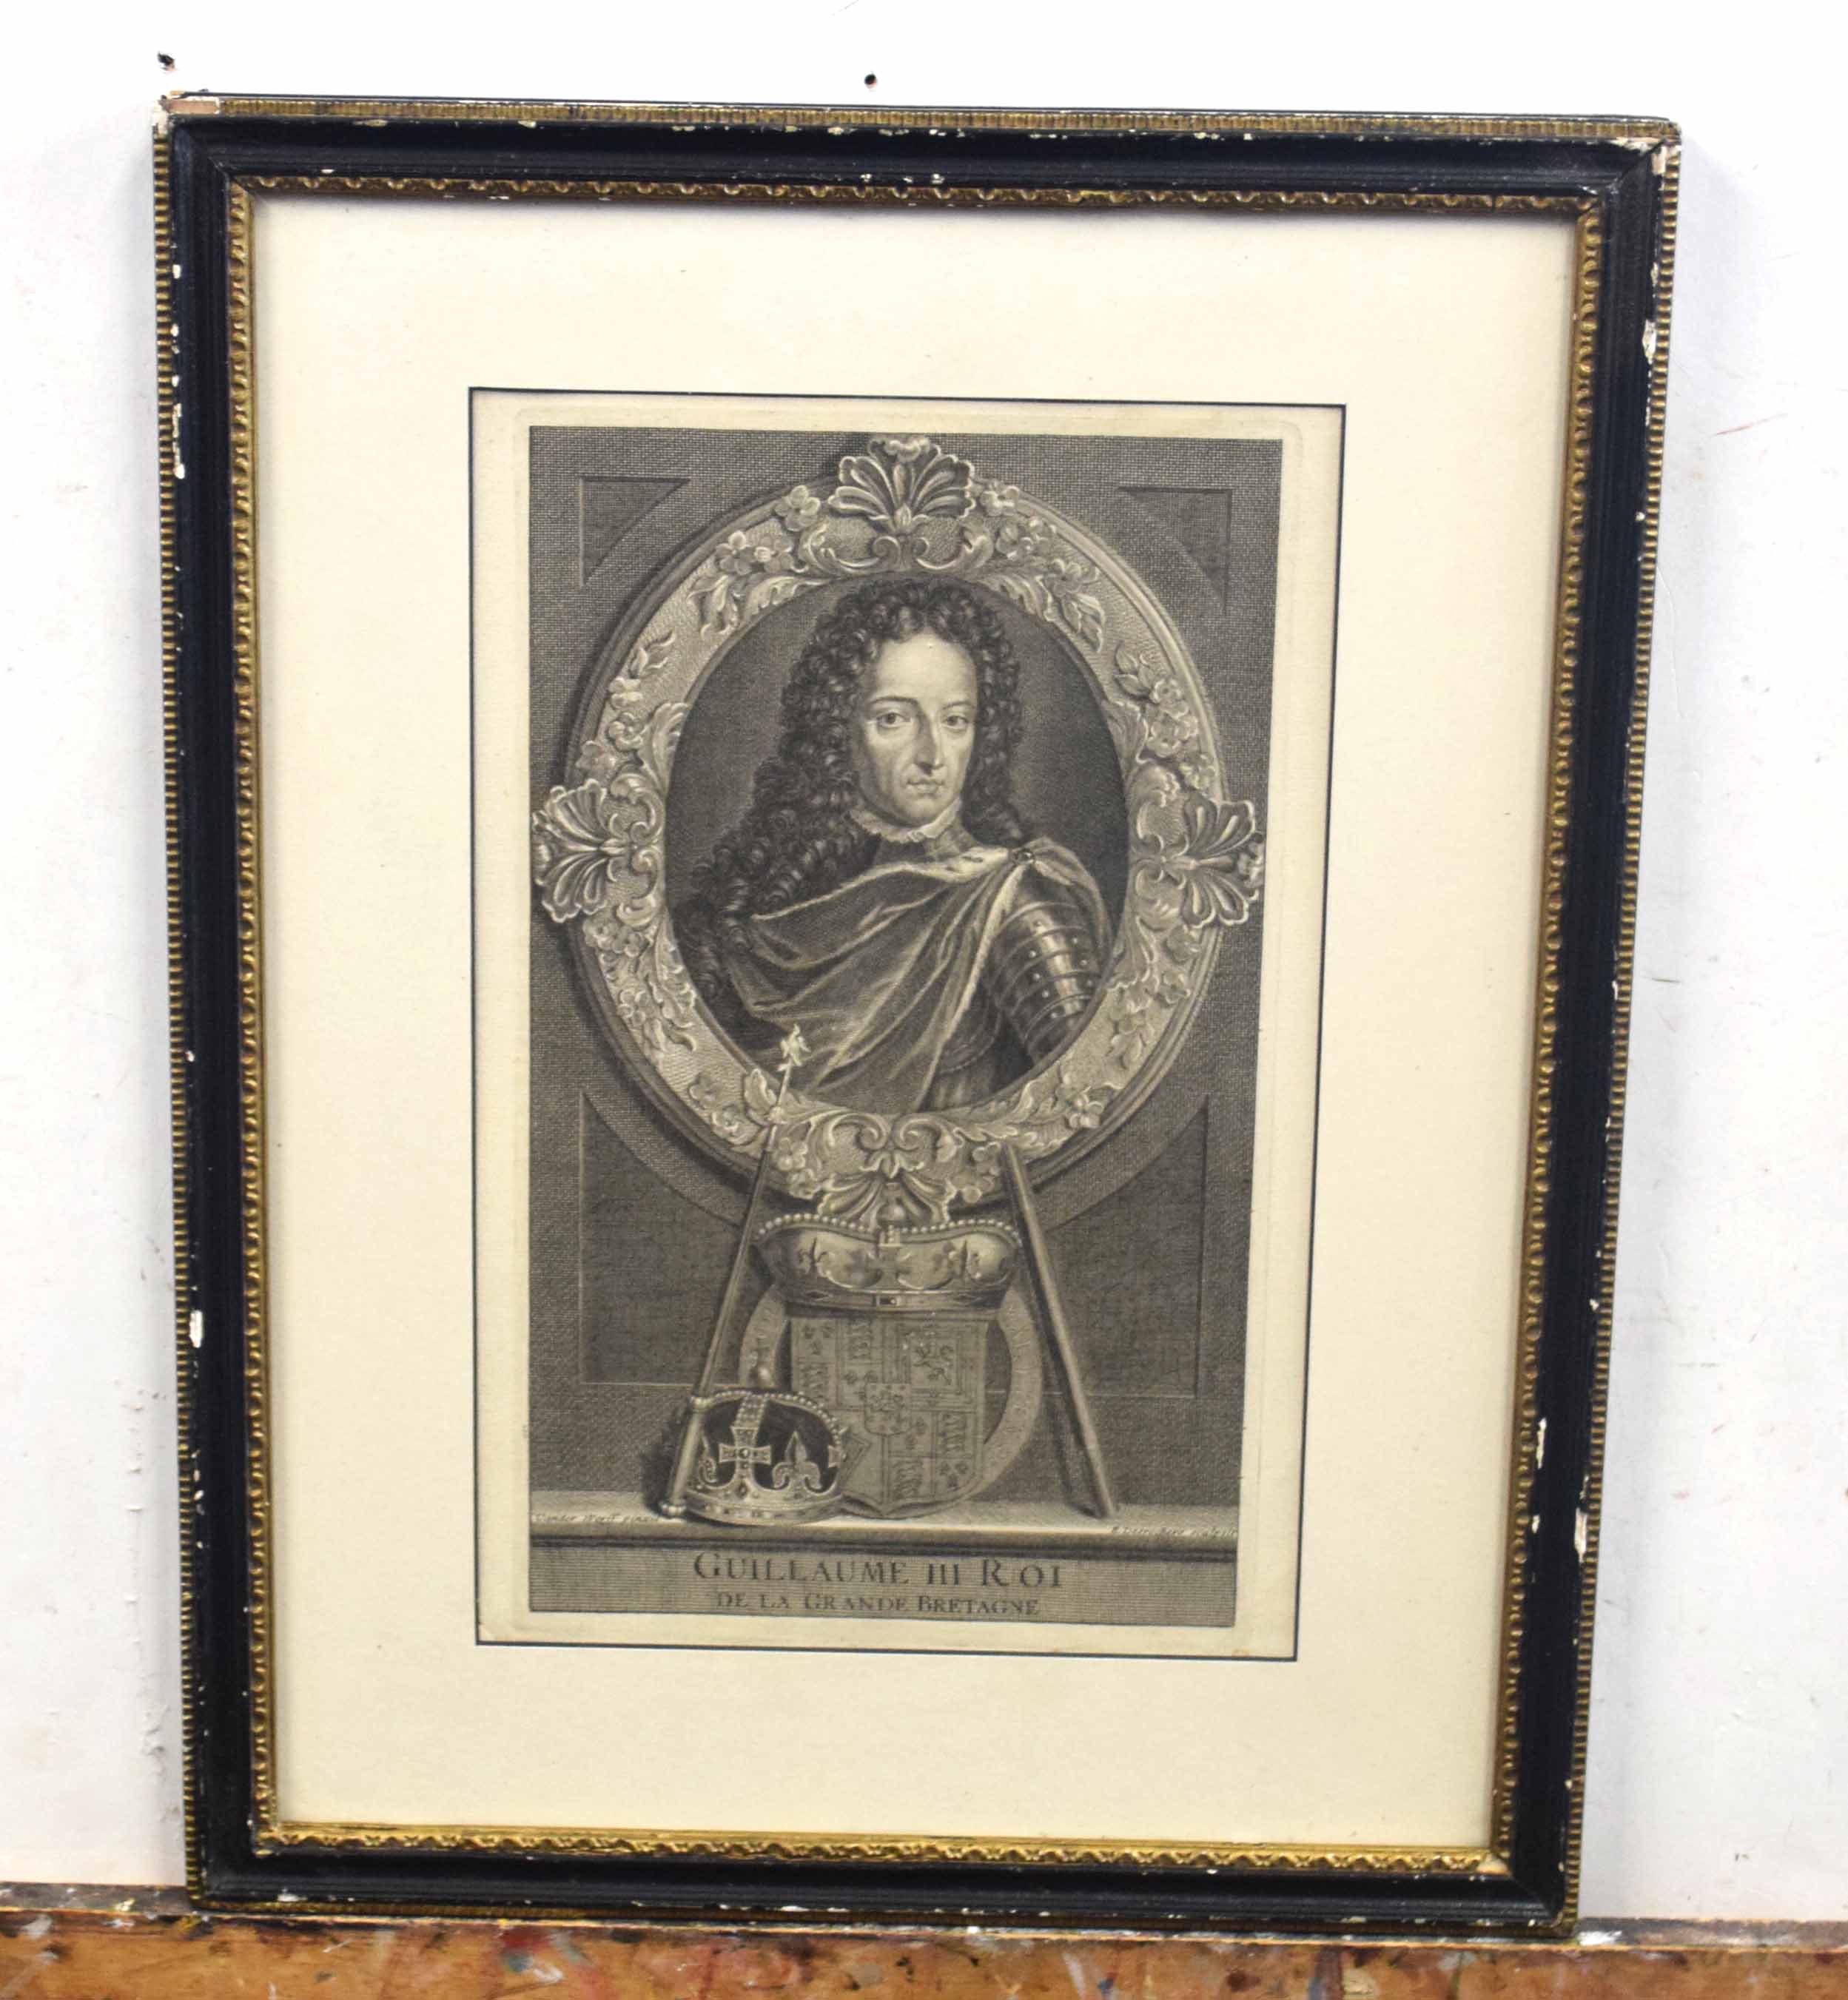 After Adriaen Van der Werf, Flemish 17C, Portraits of William III and Mary II . Engraving laid on